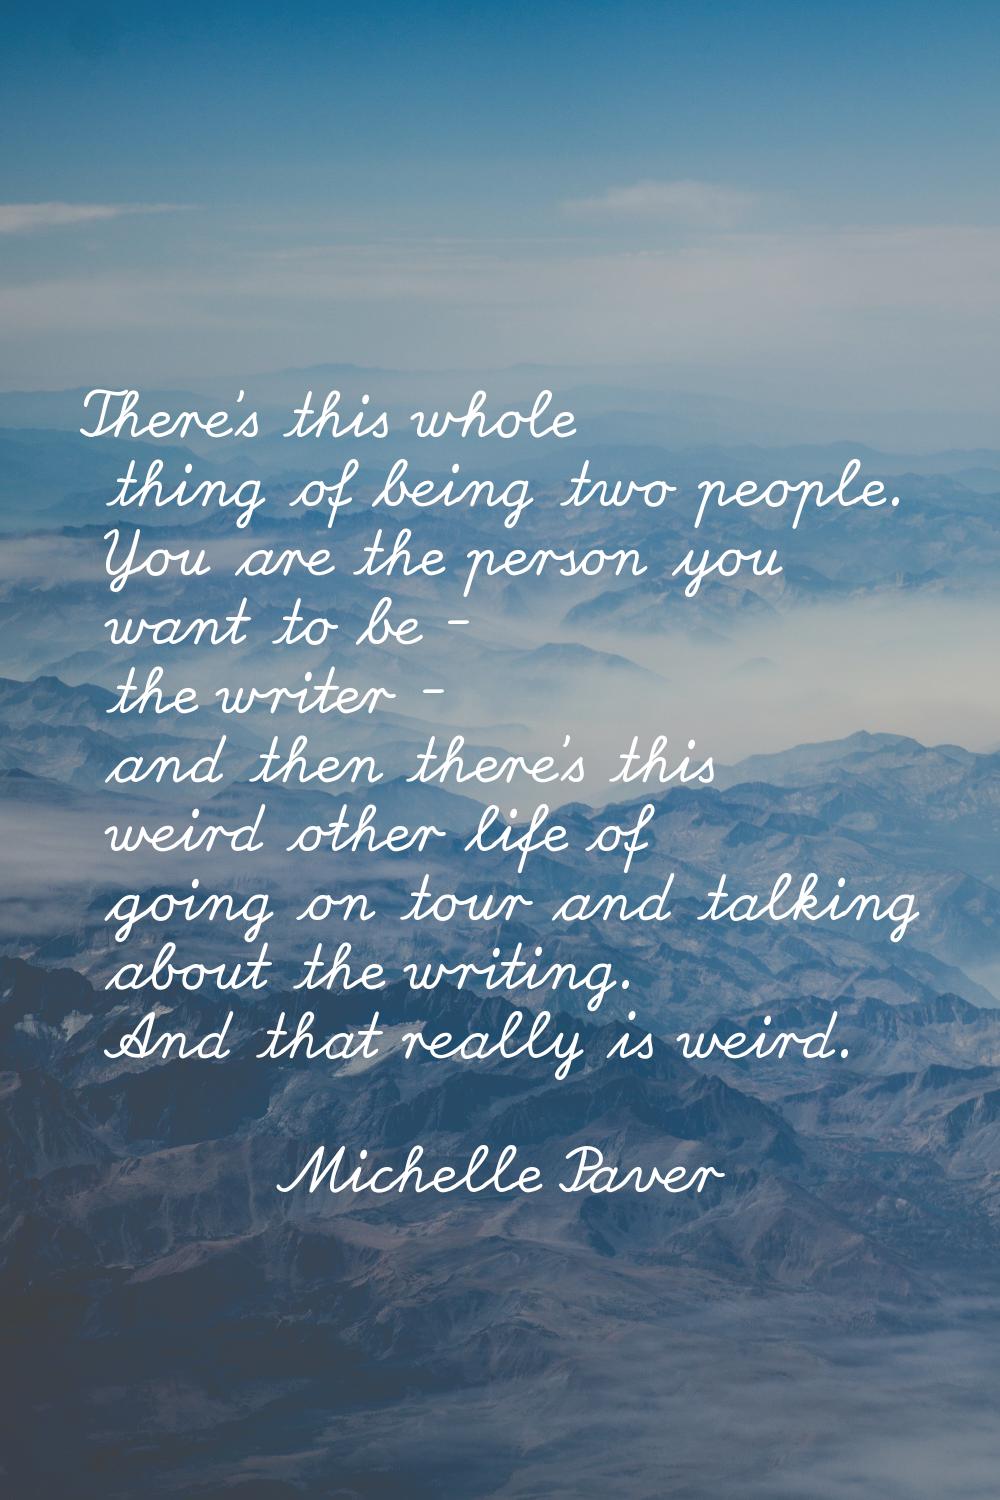 There's this whole thing of being two people. You are the person you want to be - the writer - and 